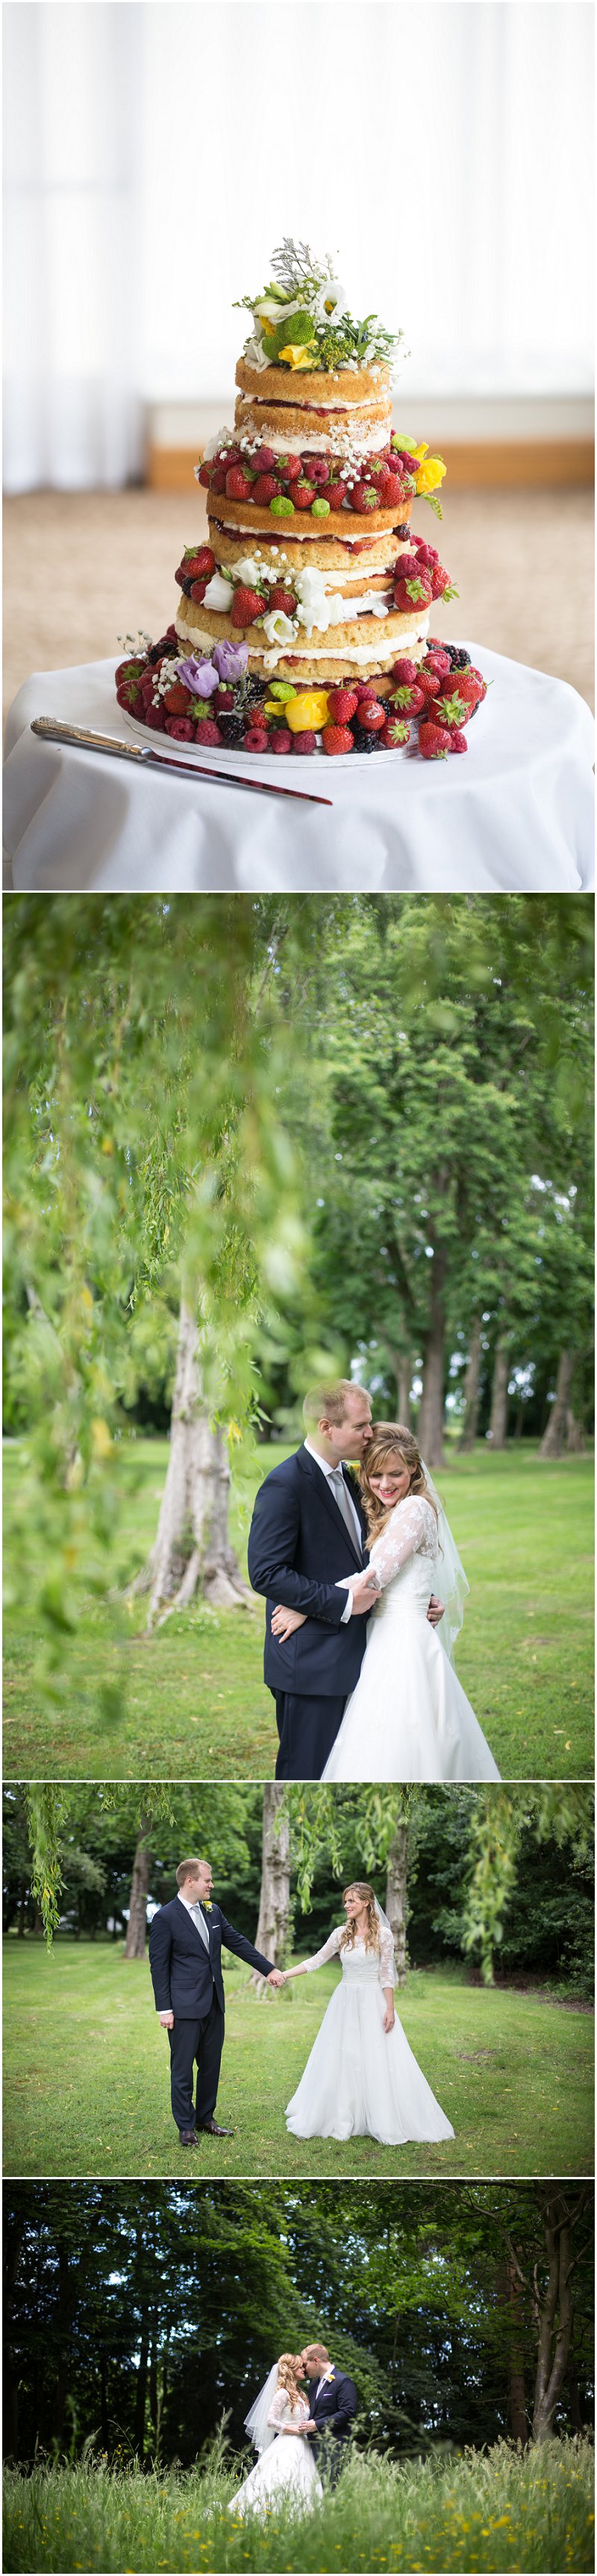 Gorgeous Bride and Groom at Chester Wedding Craxton Wood Hotel Wedding